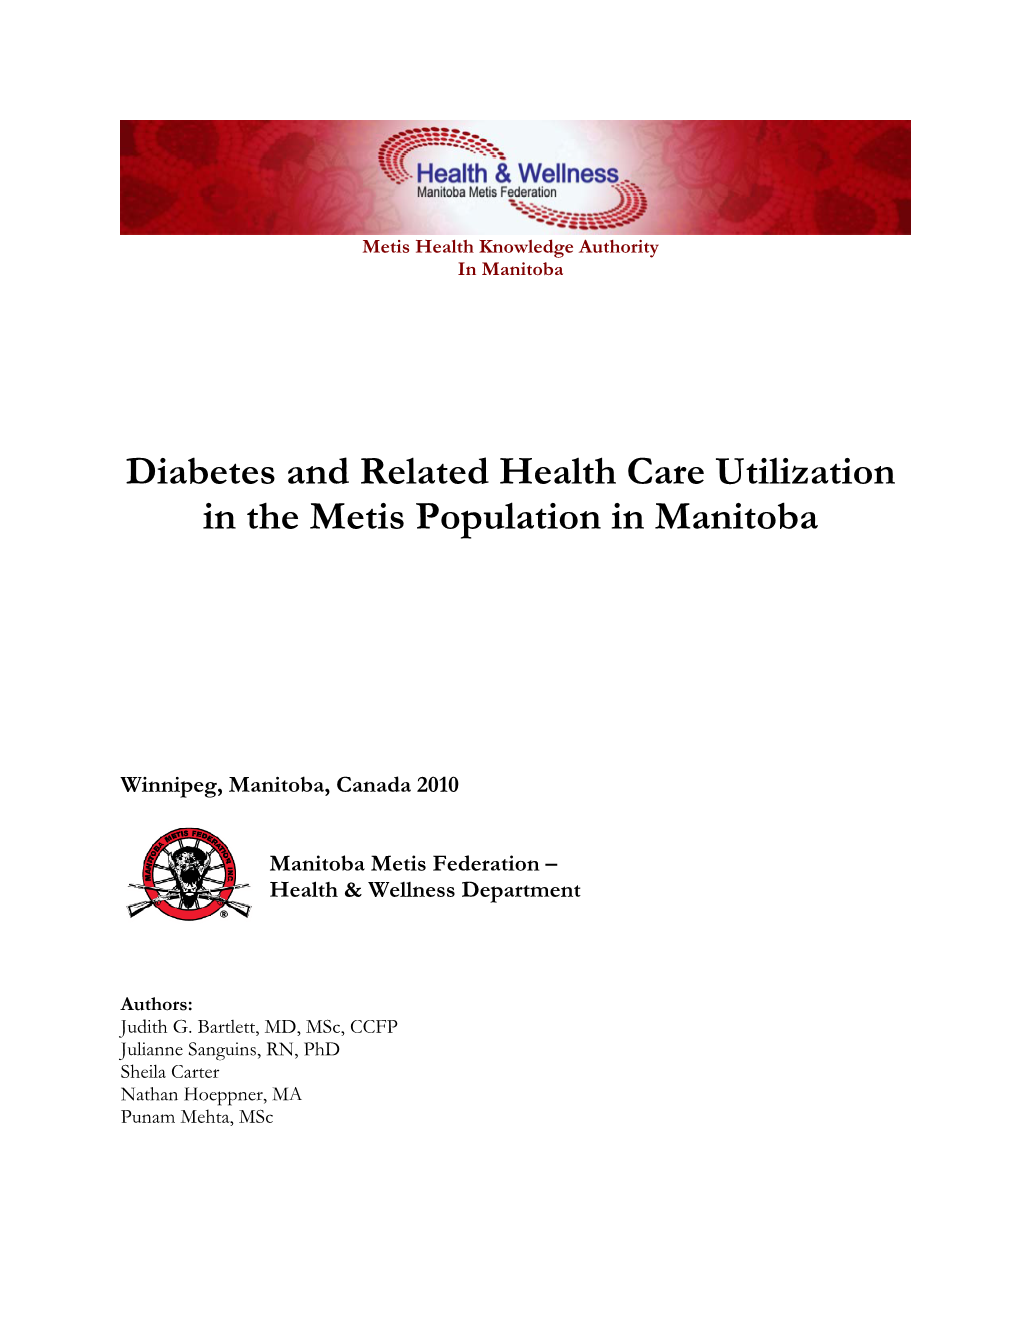 Diabetes and Related Health Care Utilization in the Metis Population in Manitoba